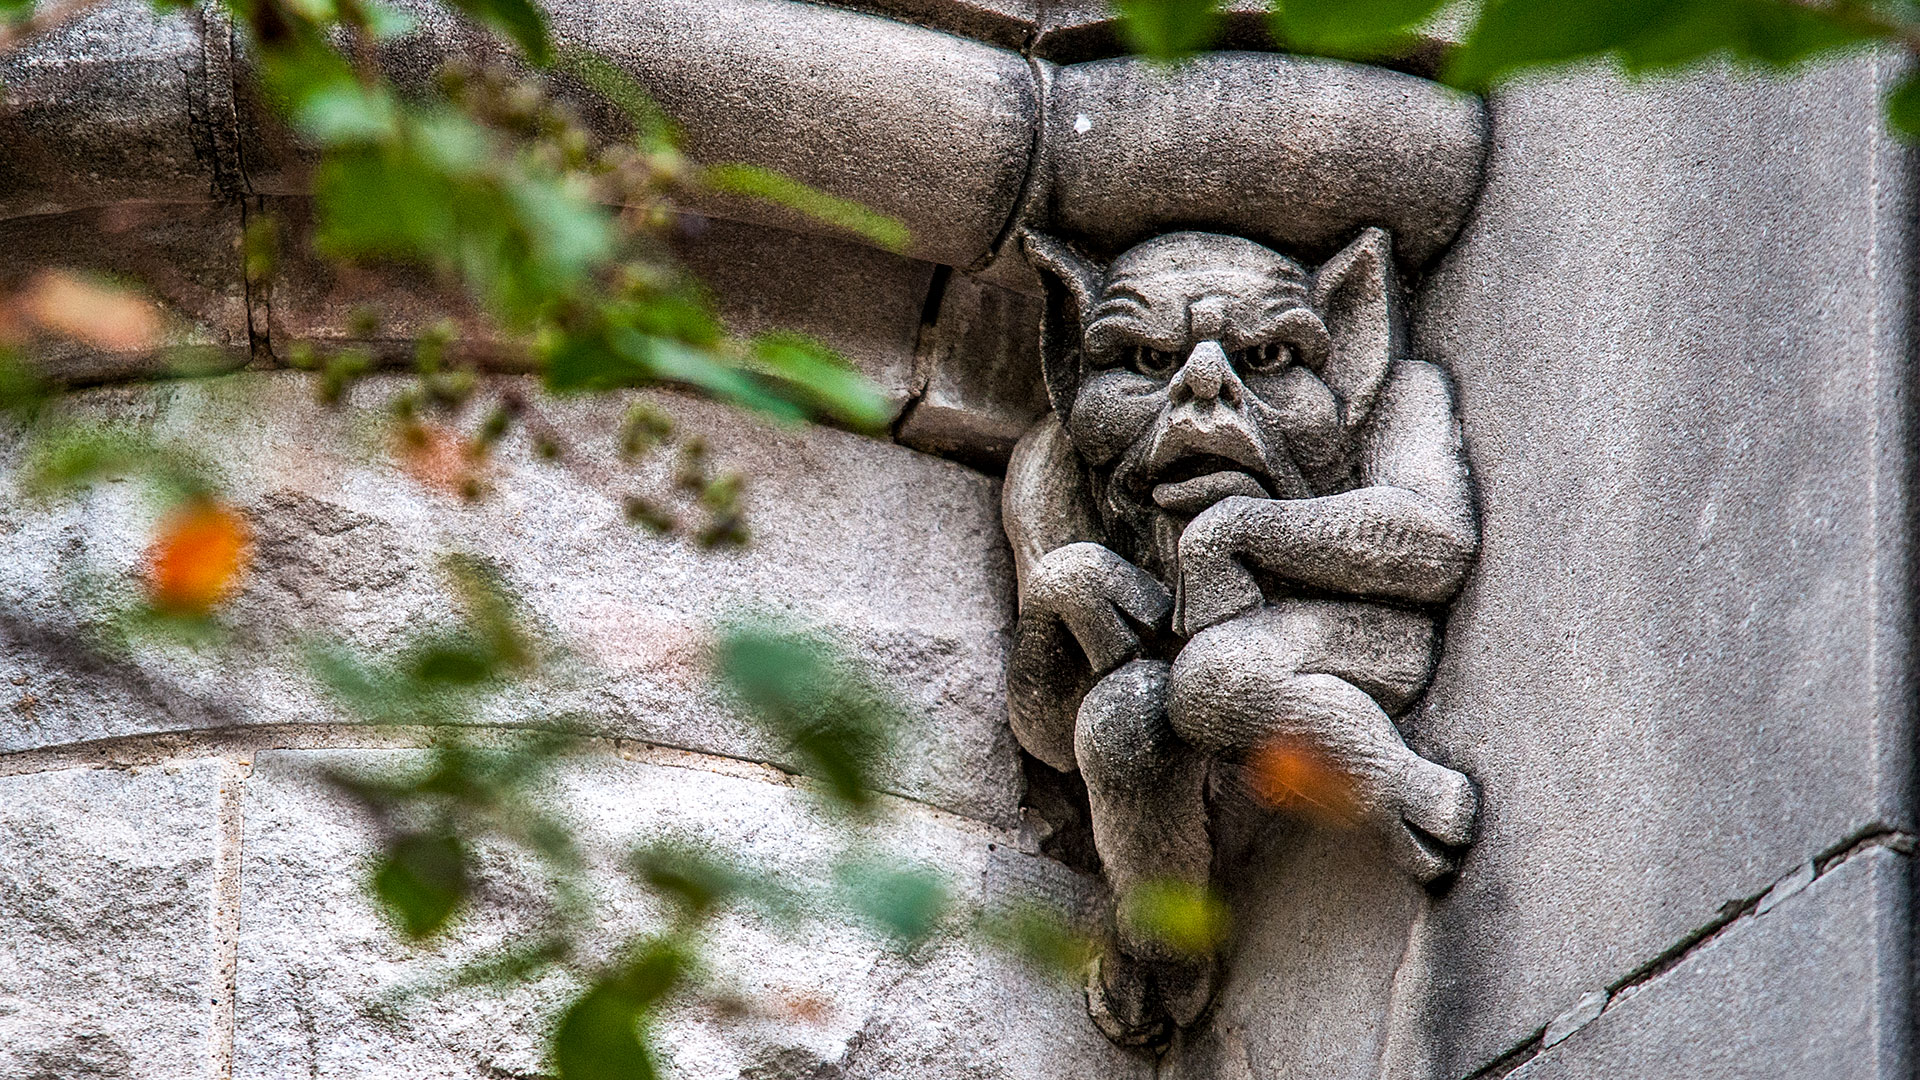 A chimera looks down from its perch high above a side entrance to Norman Mayer Hall on the Tulane University uptown campus. Copyright Tulane University